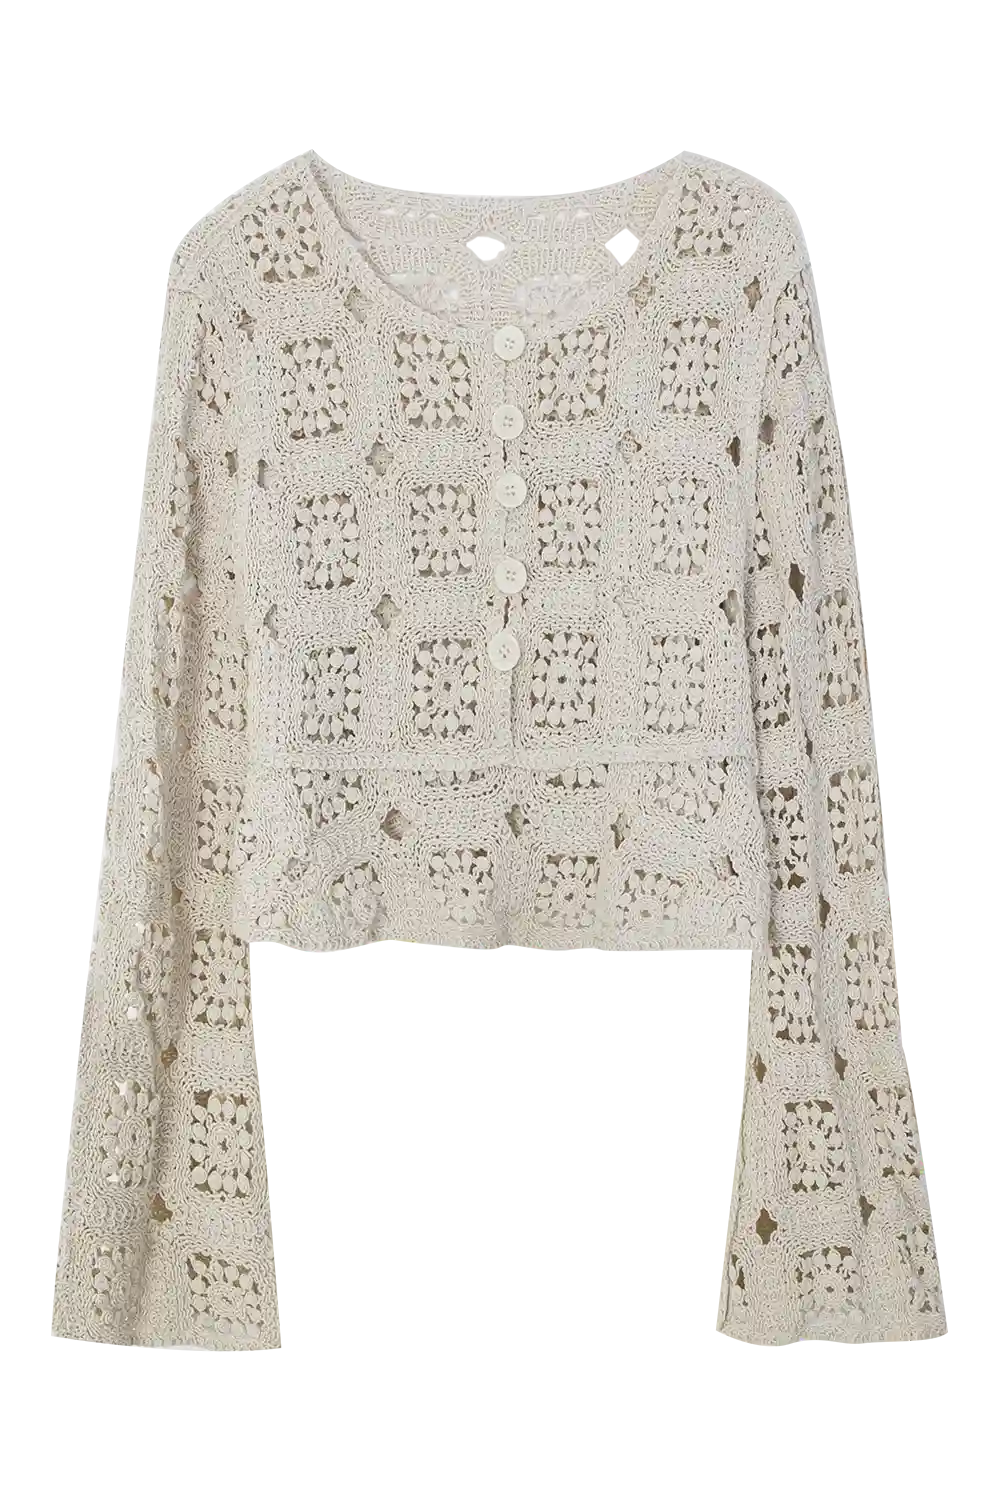 Chic Crocheted Long-Sleeve Cardigan with Button Details